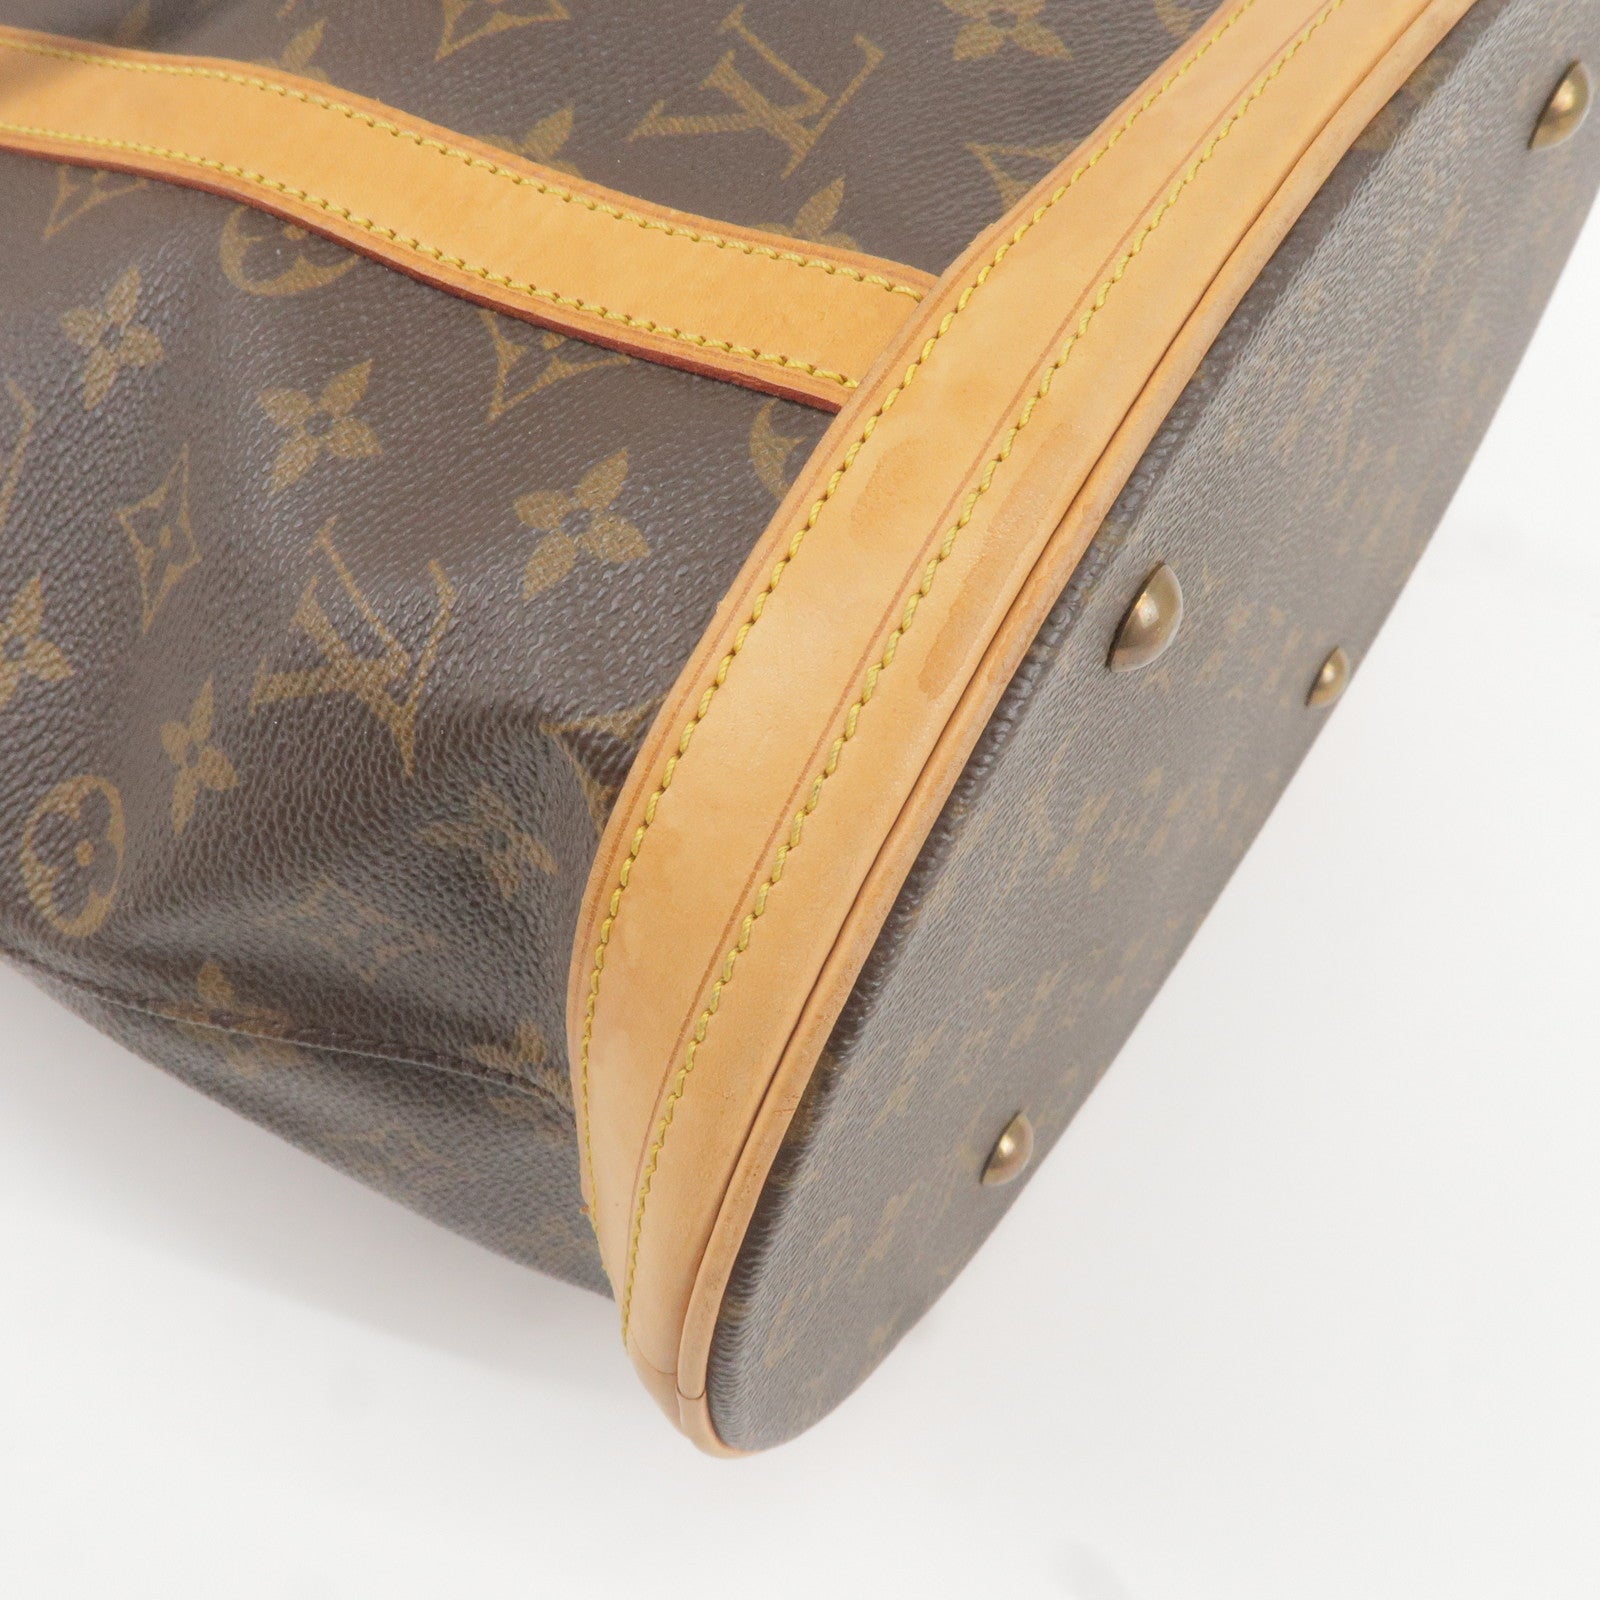 Louis Vuitton 2007 Pre-owned Monogram Two-Way Bag